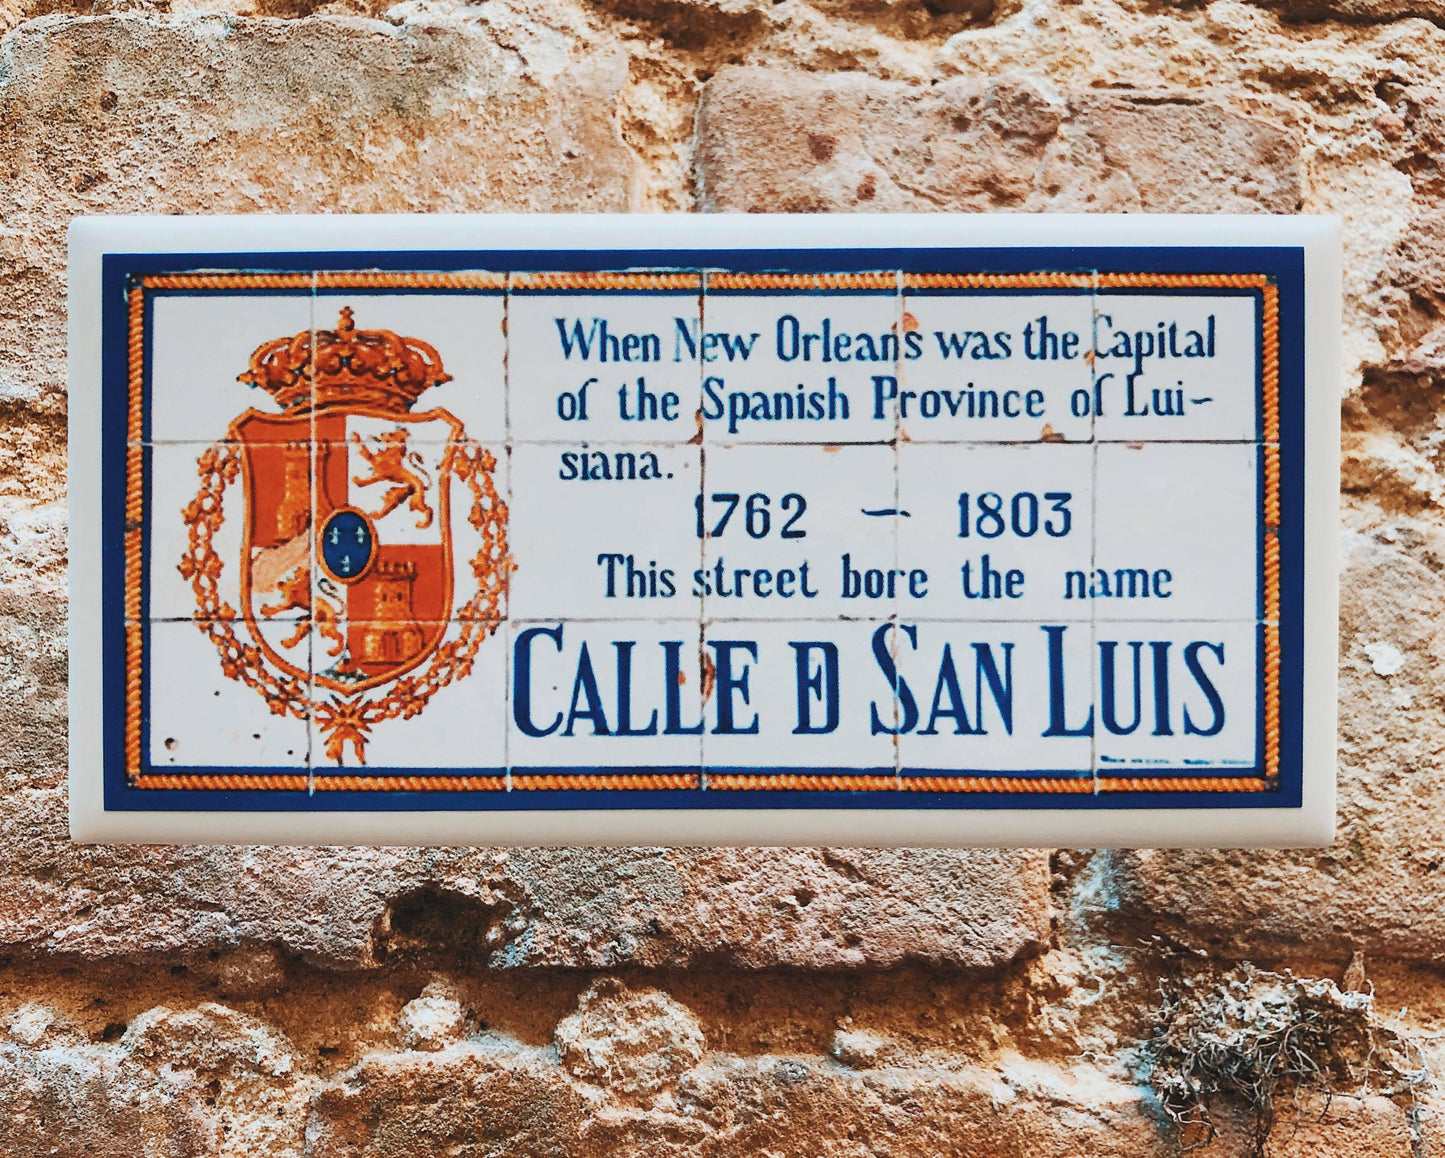 Replicas of the Spanish colonial street names found around the French Quarter. 6" x 3" tile  Locally made in Louisiana  Available names: Orleans, Bourbon, Plaza D' Armas, Real (Royal), Del Main (Dumaine) and San Luis (St. Louis)